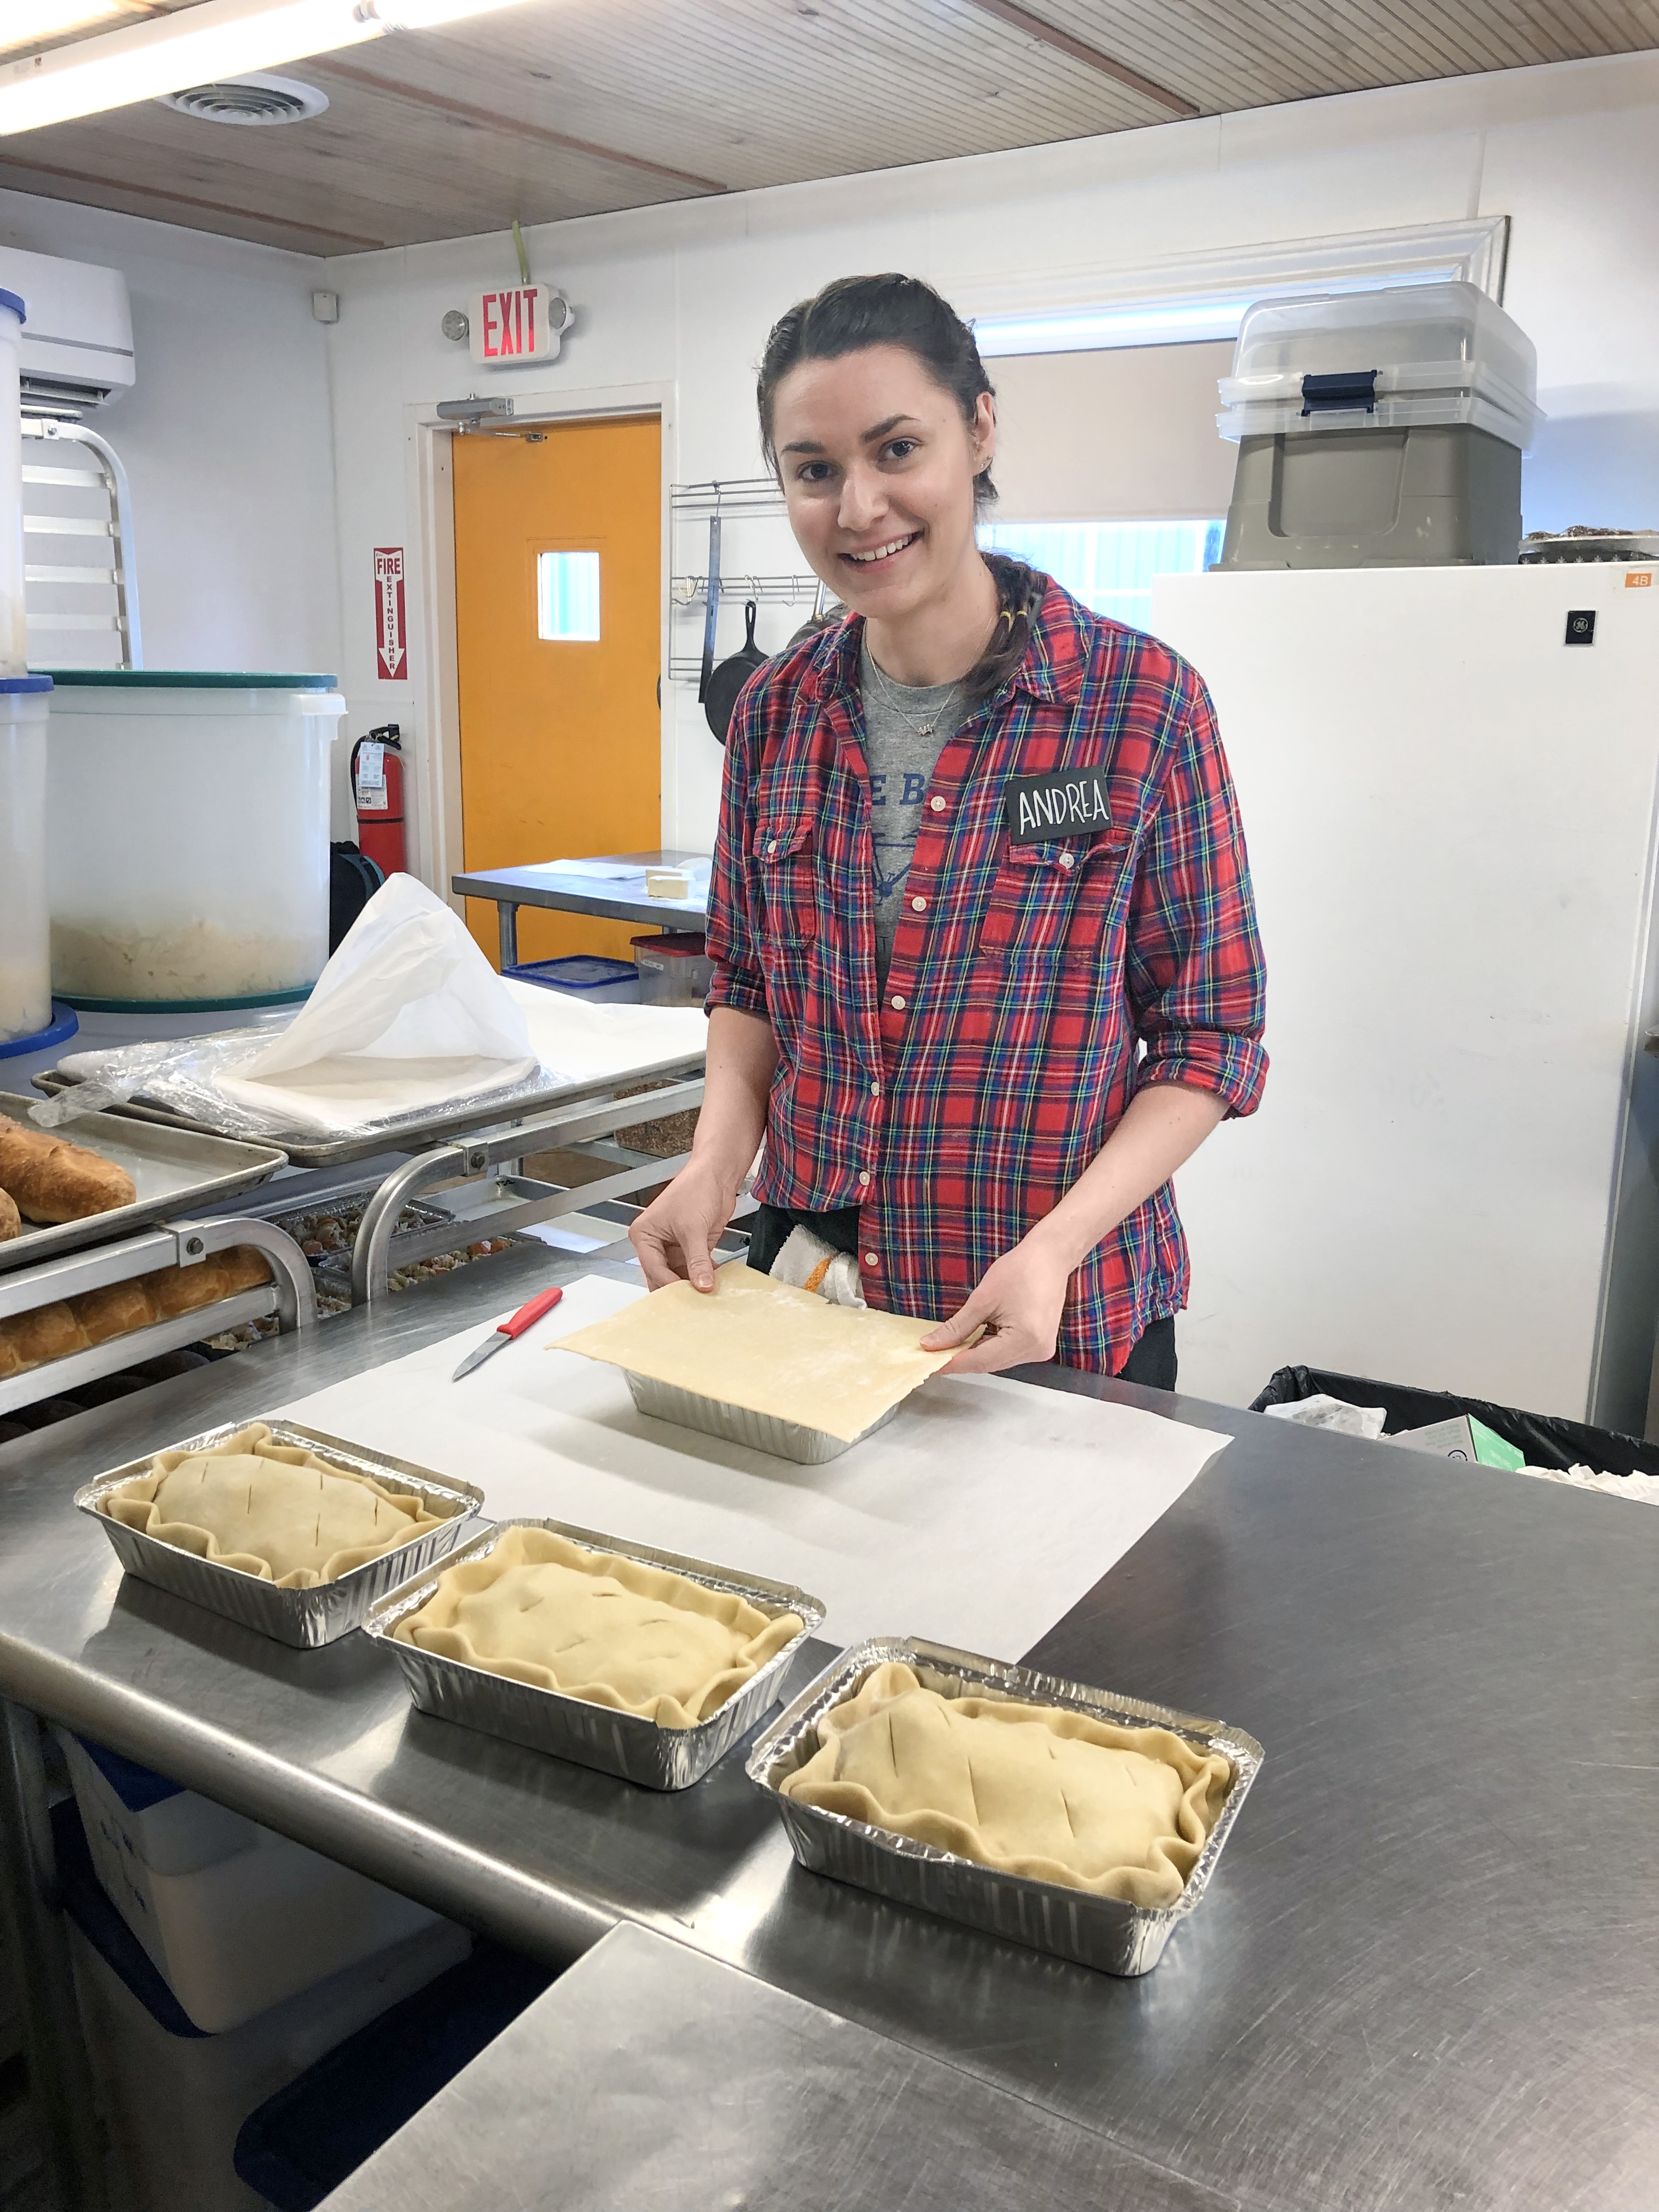 BJU culinary arts alumni Andrea Jacquette in the kitchen of the Swamp Rabbit Cafe preparing chicken pot pies